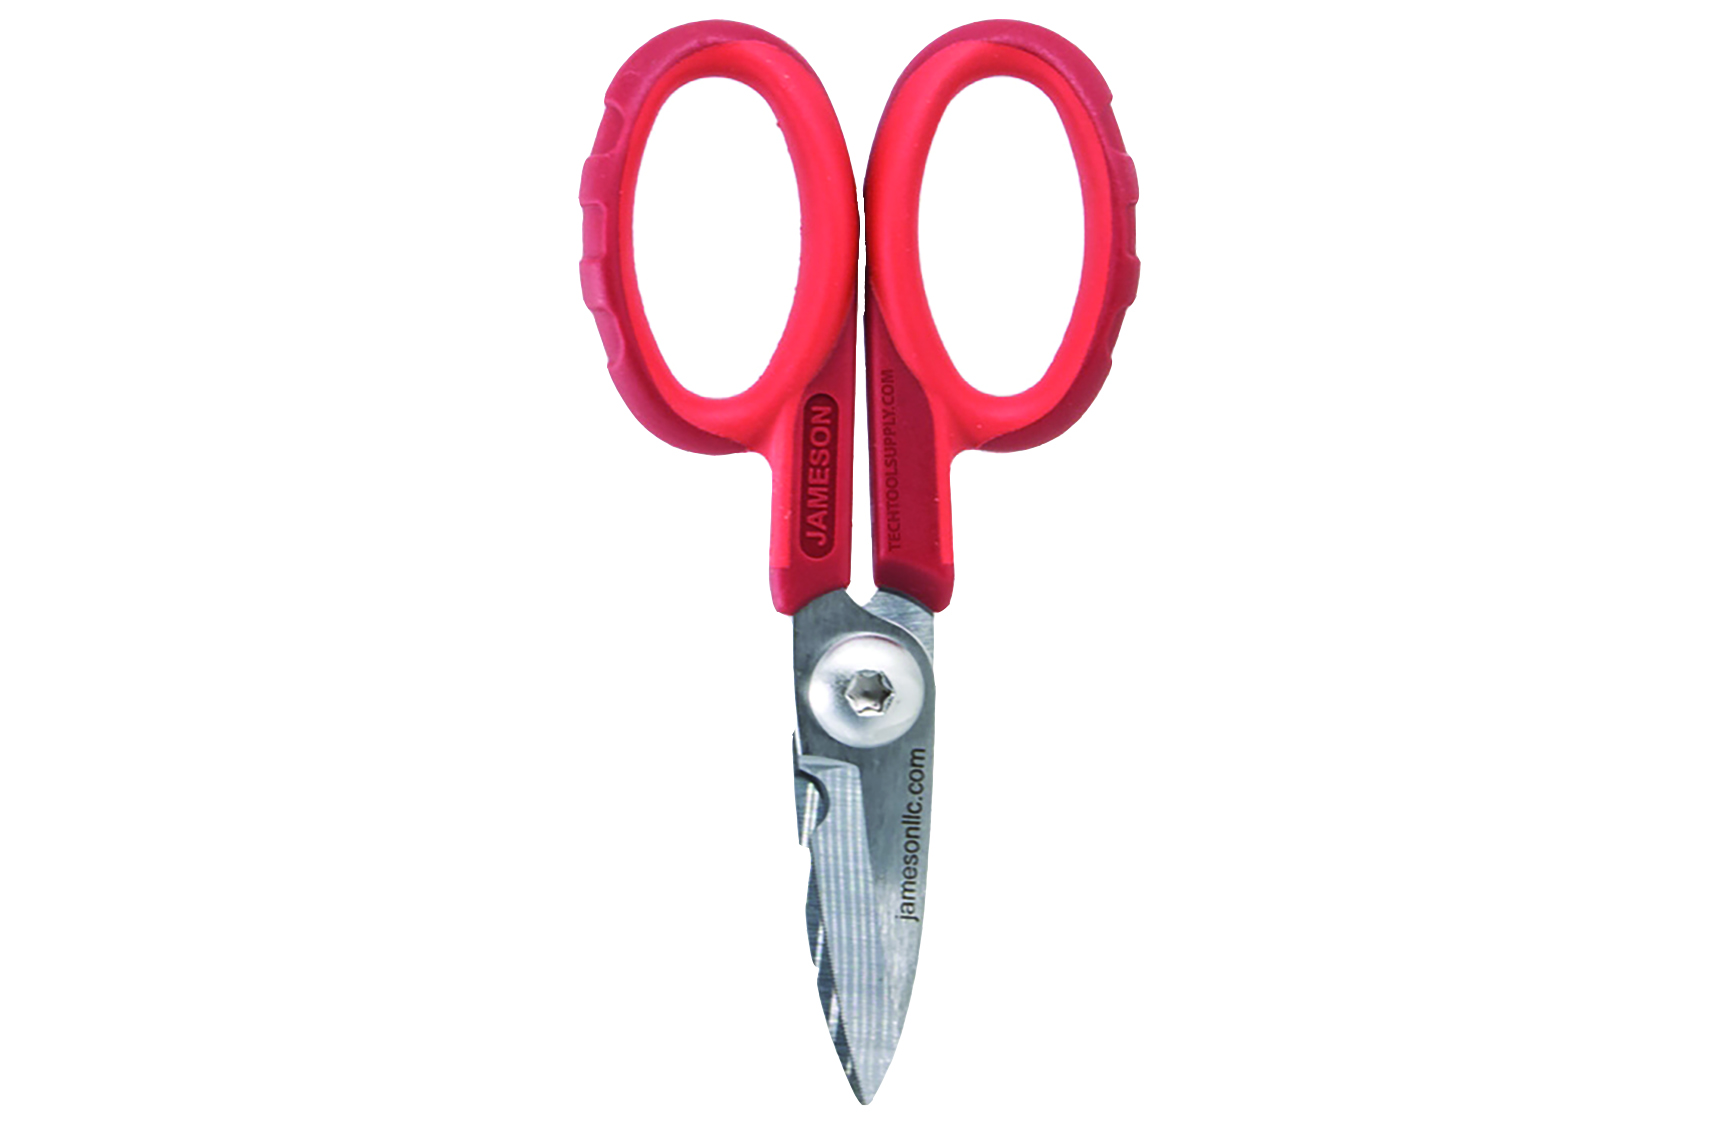 Red and silver shears. Image by Jameson.